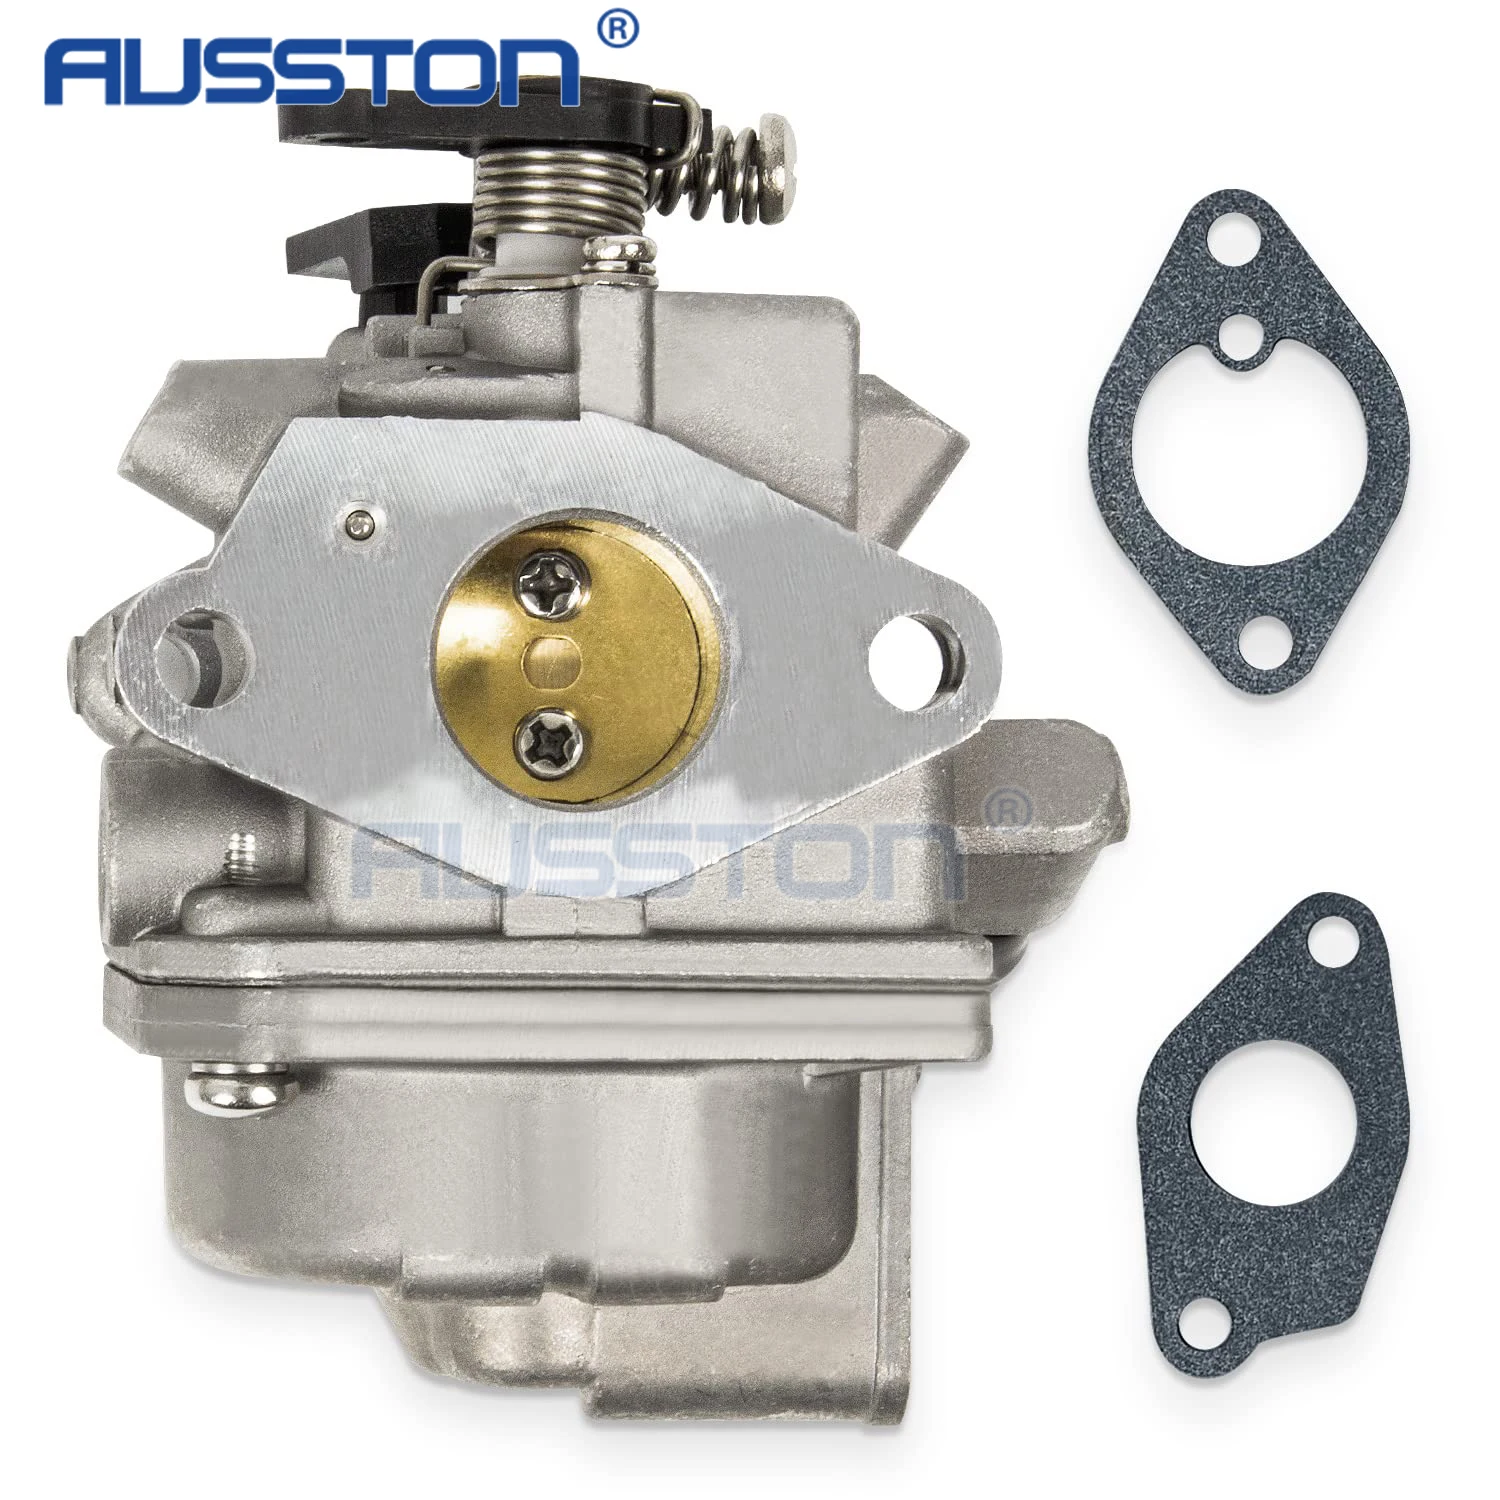 

Boat Motor Carburetor Carb Assy 3R1-03200 for Nissan Tohatsu Mercury 4 Stroke MF3.5 MFS4 MFS5 NFS4 3.5HP 4HP 5HP 6HP Outboards